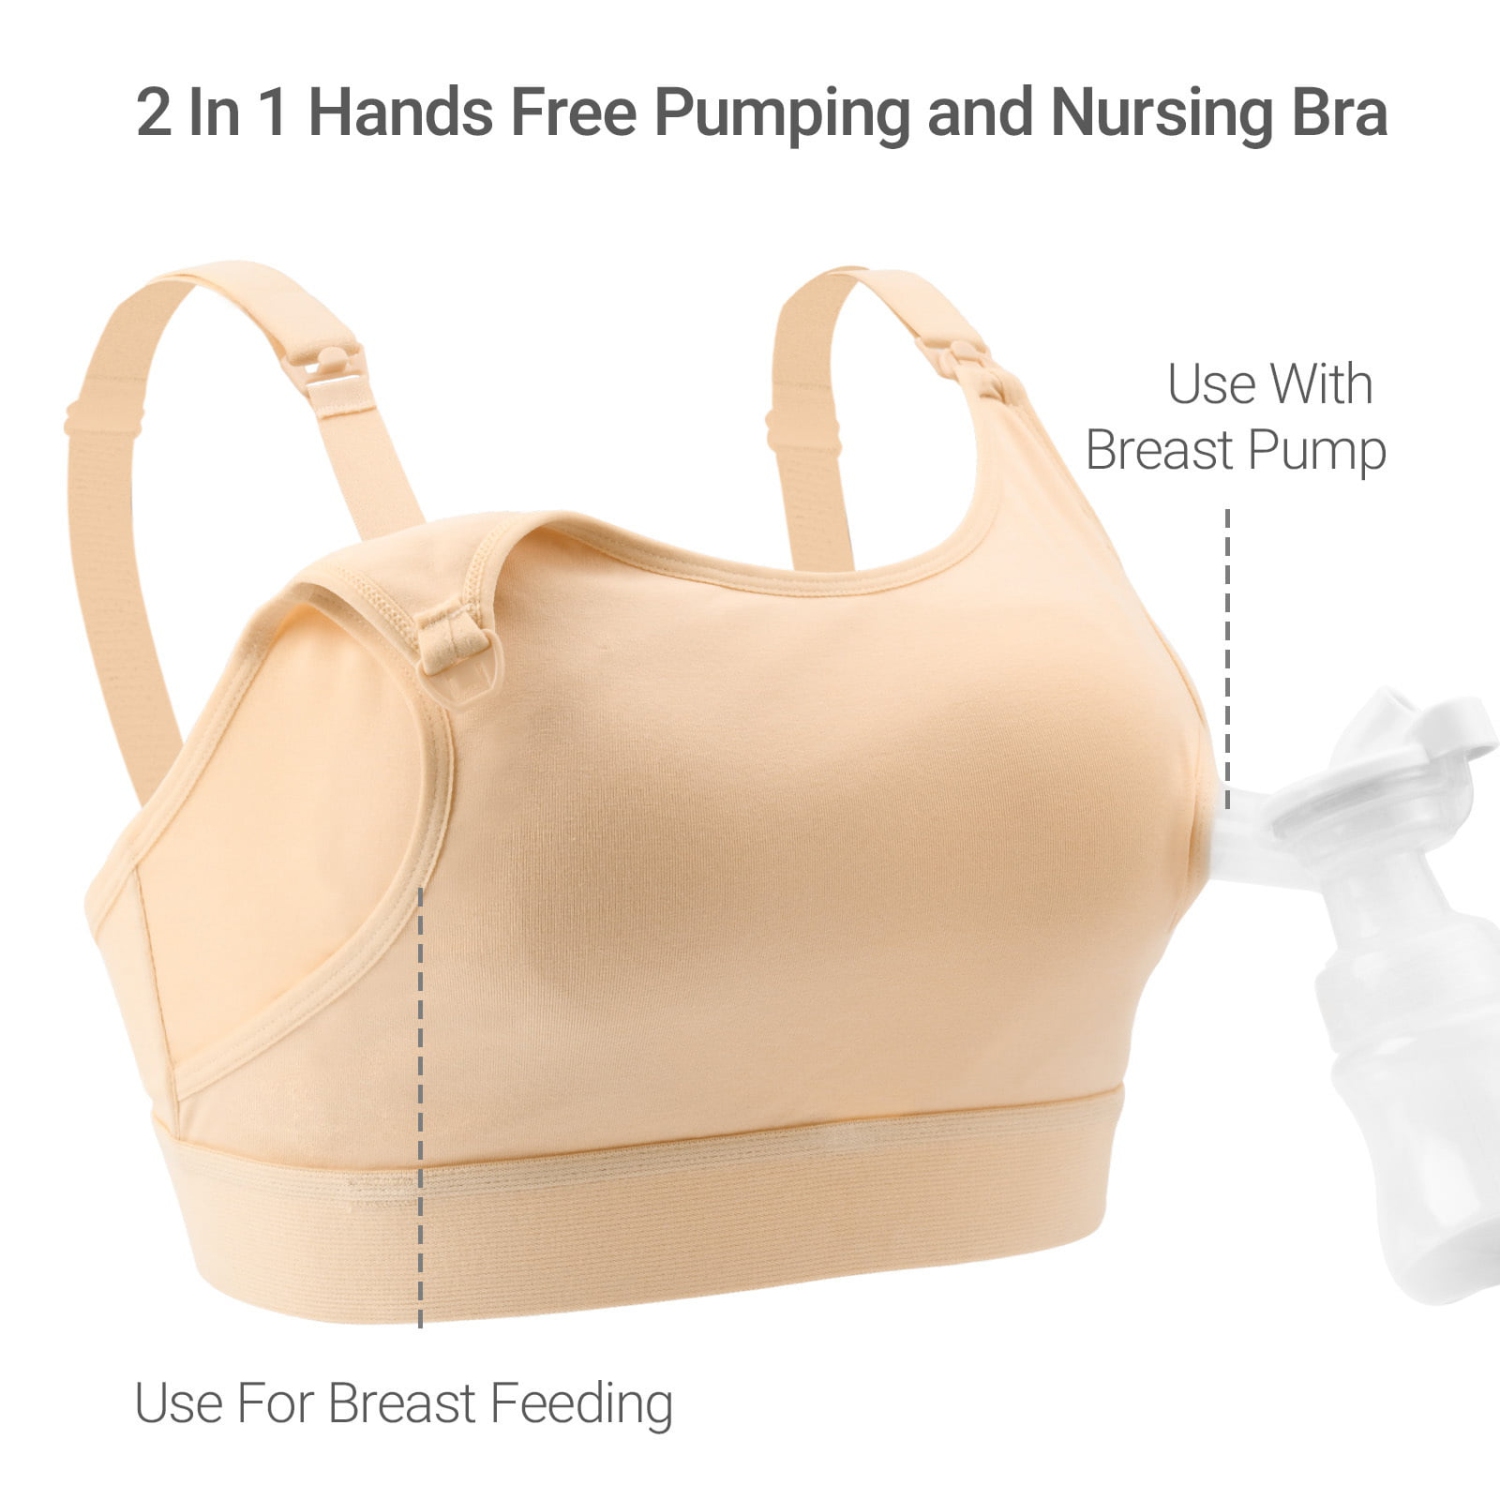 Momcozy Hands Free Pumping Bra, Adjustable Breast-Pumps Holding and Nursing  Bra, Suitable for Breast Pump by Lansinoh, etc Grey